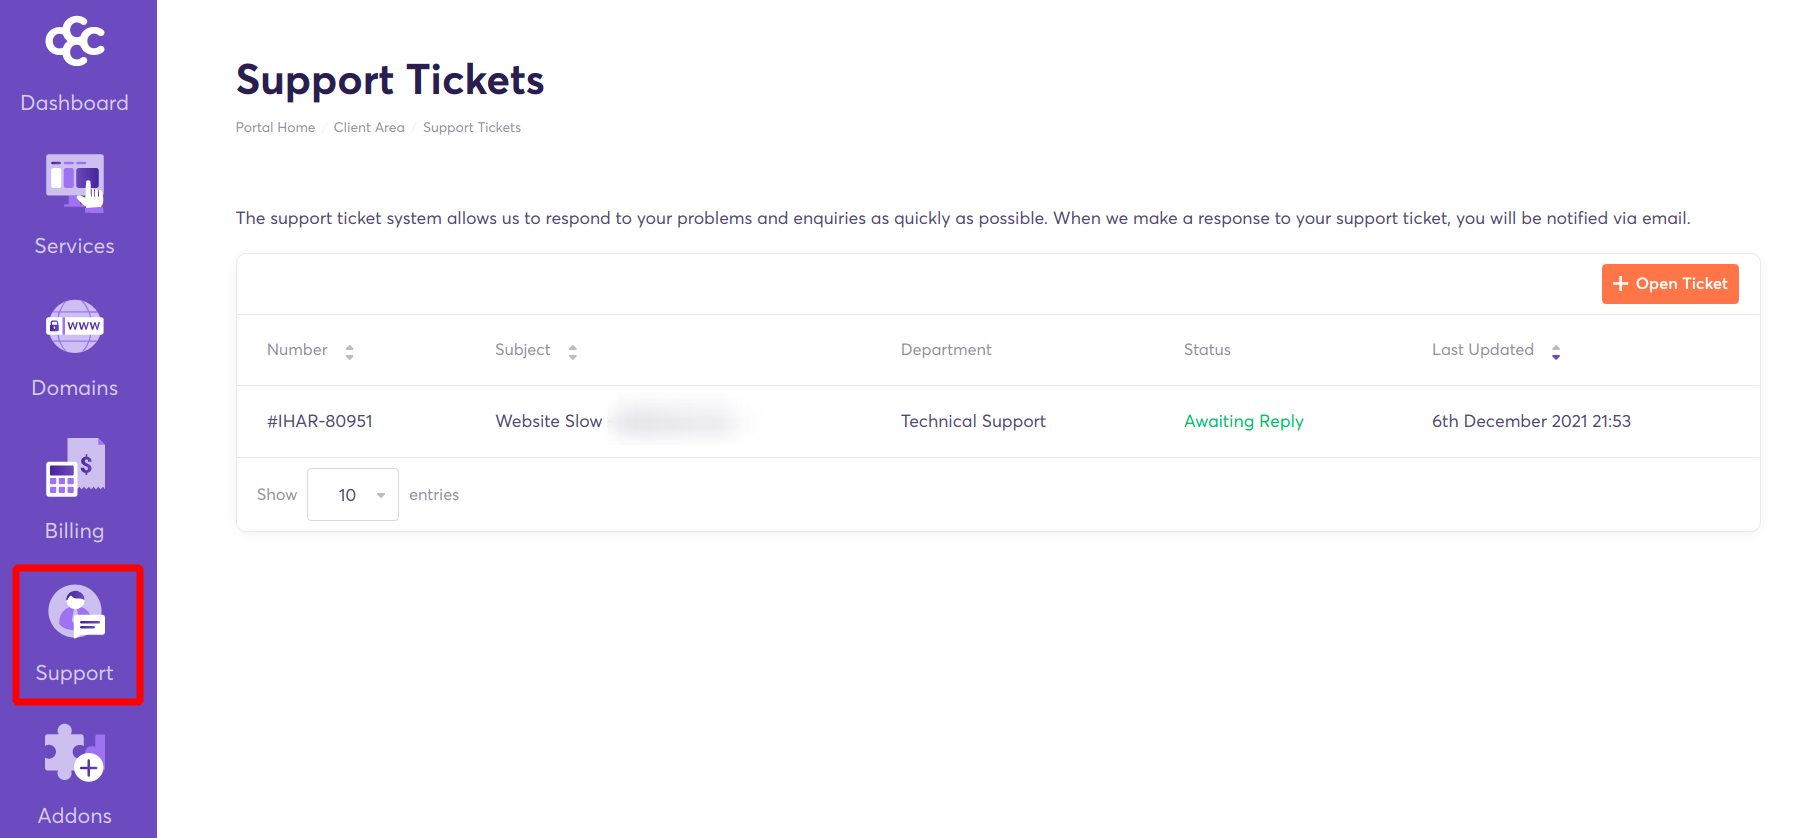 support tickets page - Chemicloud client area